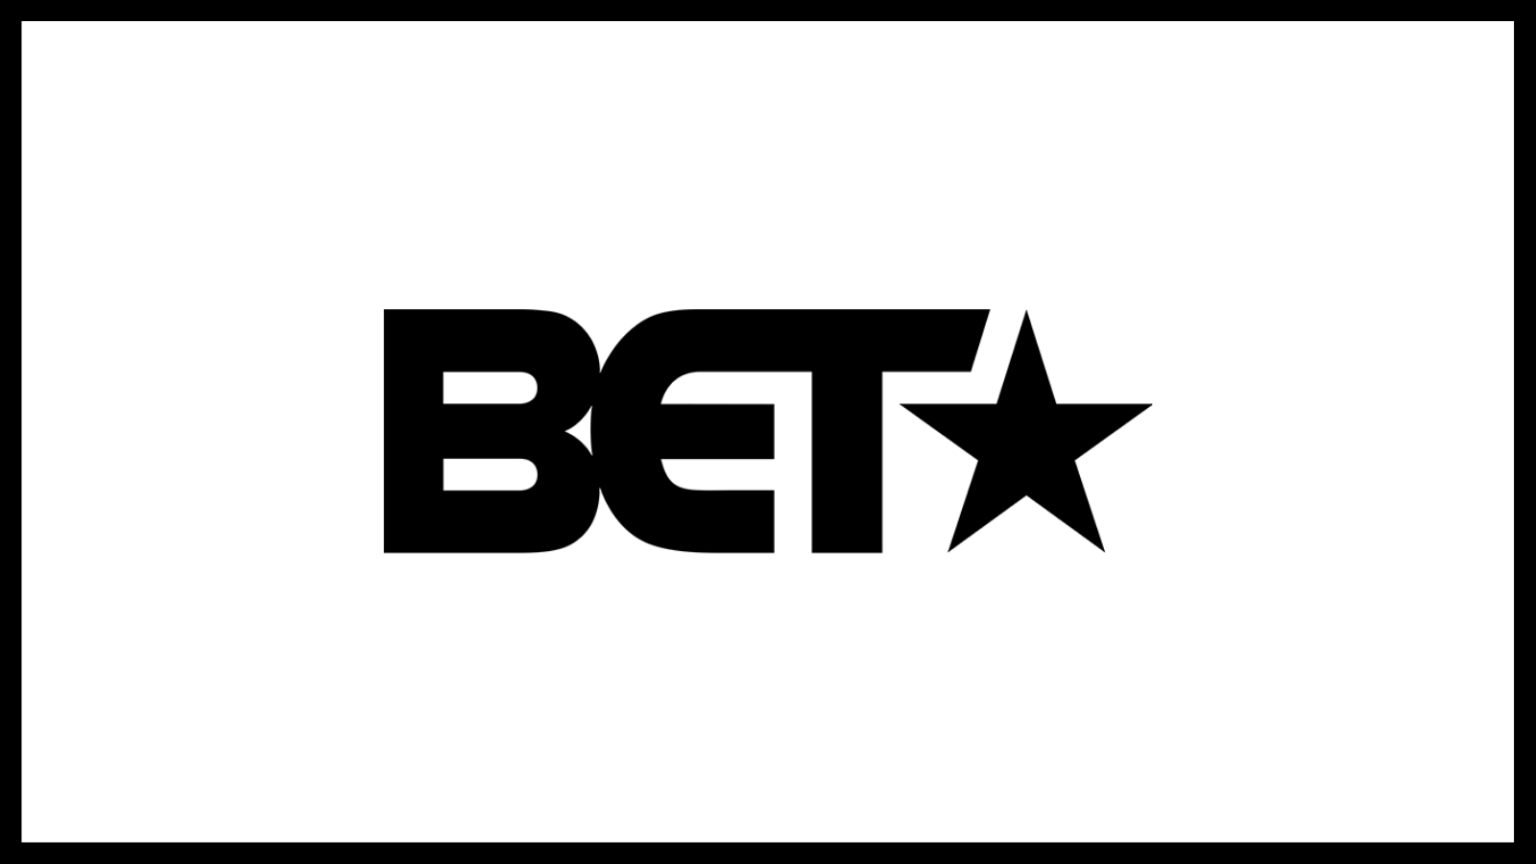 withdraw from bet online